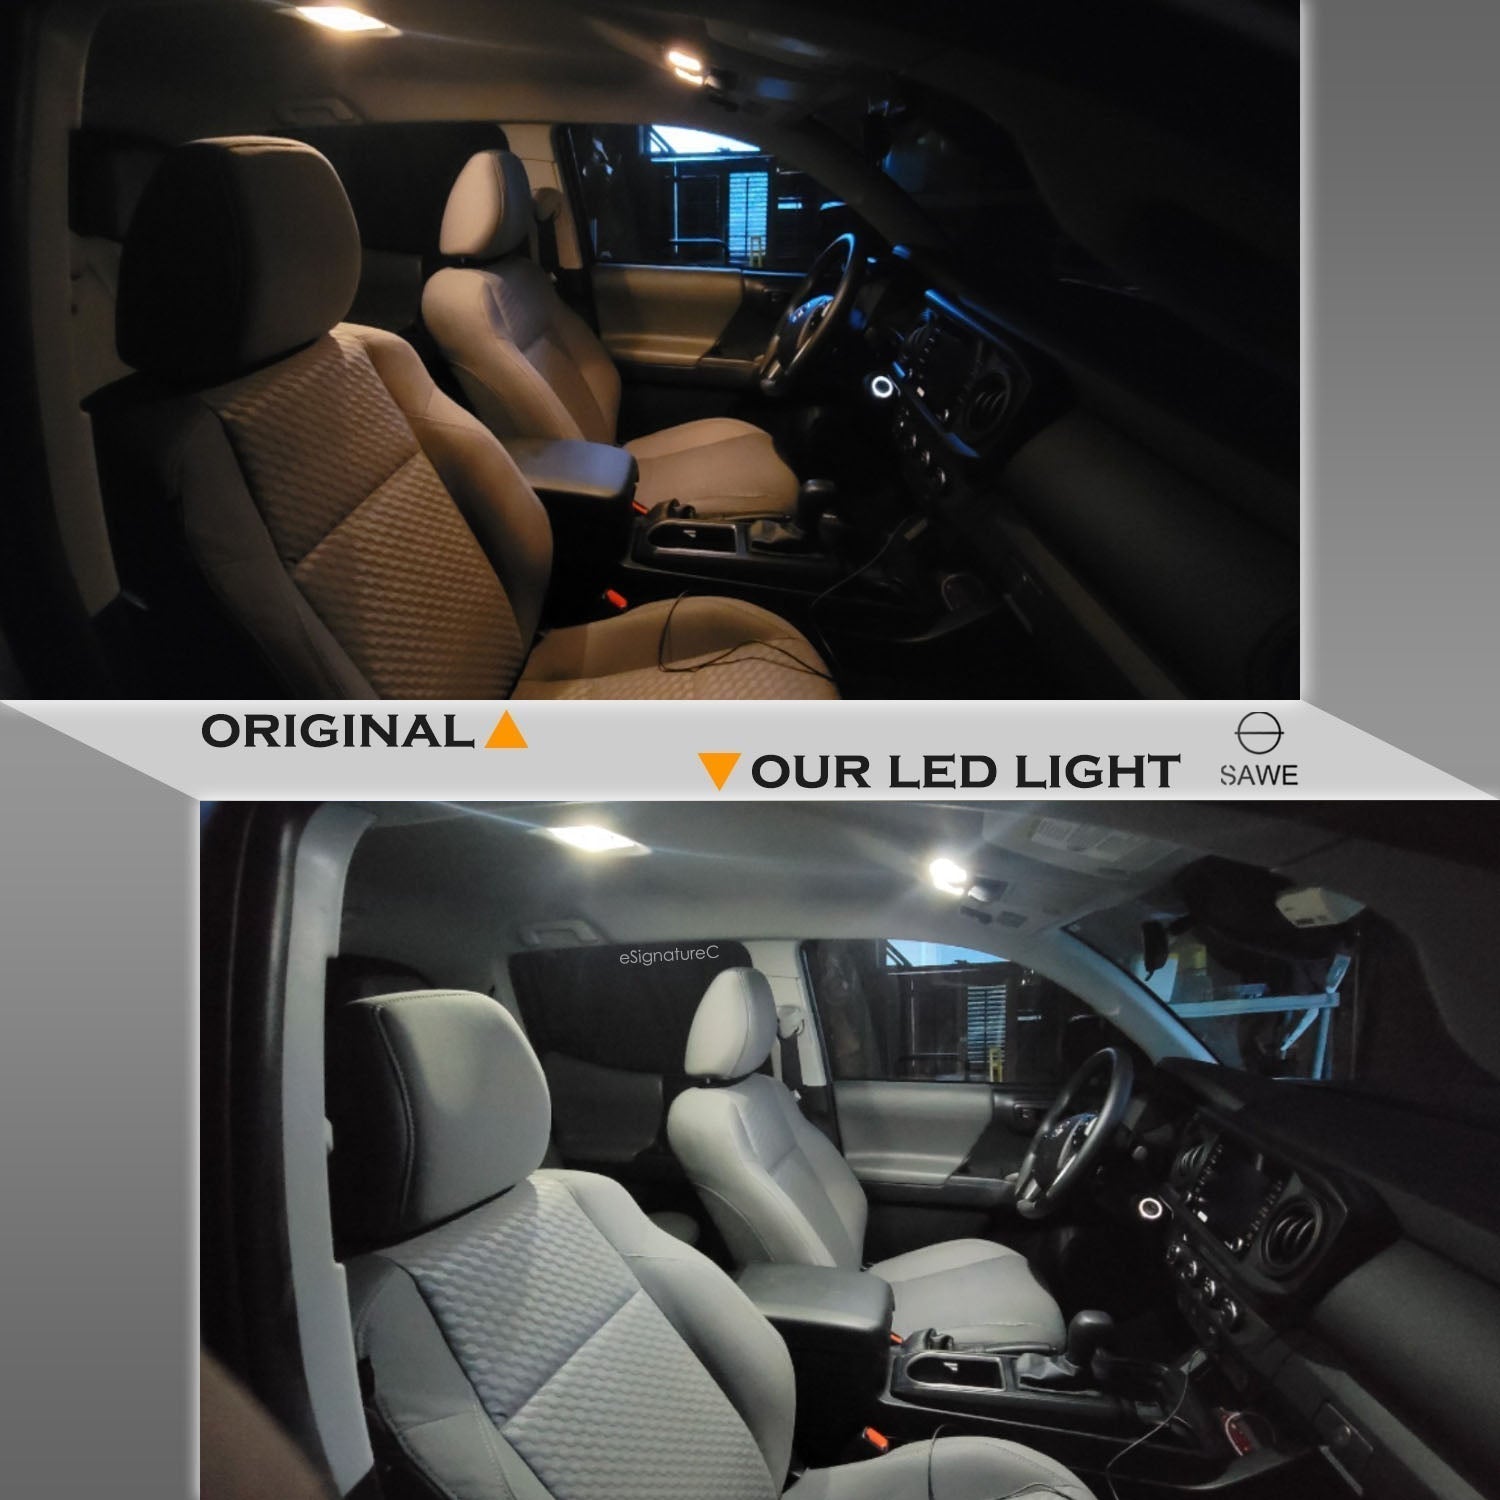 For Subaru Forester Interior LED Lights - Dome & Map Light Bulbs Package Kit for 1998 - 2013 - White